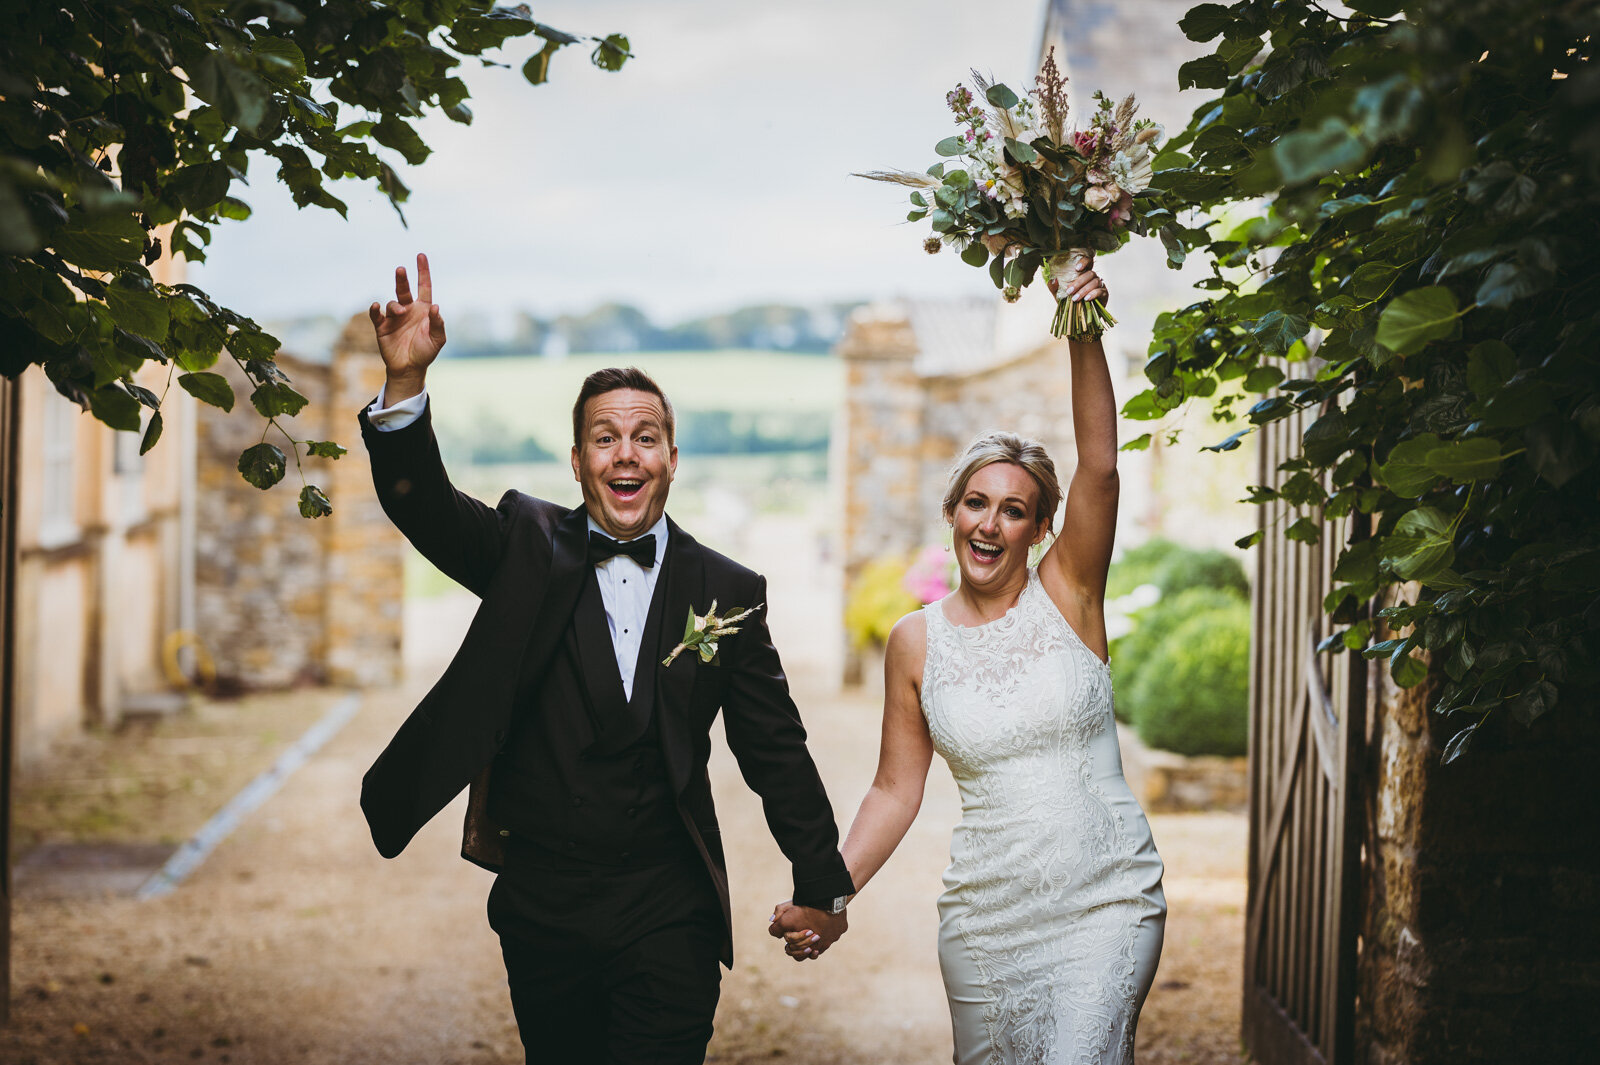 husband and wife raise arms to celebrate their marriage